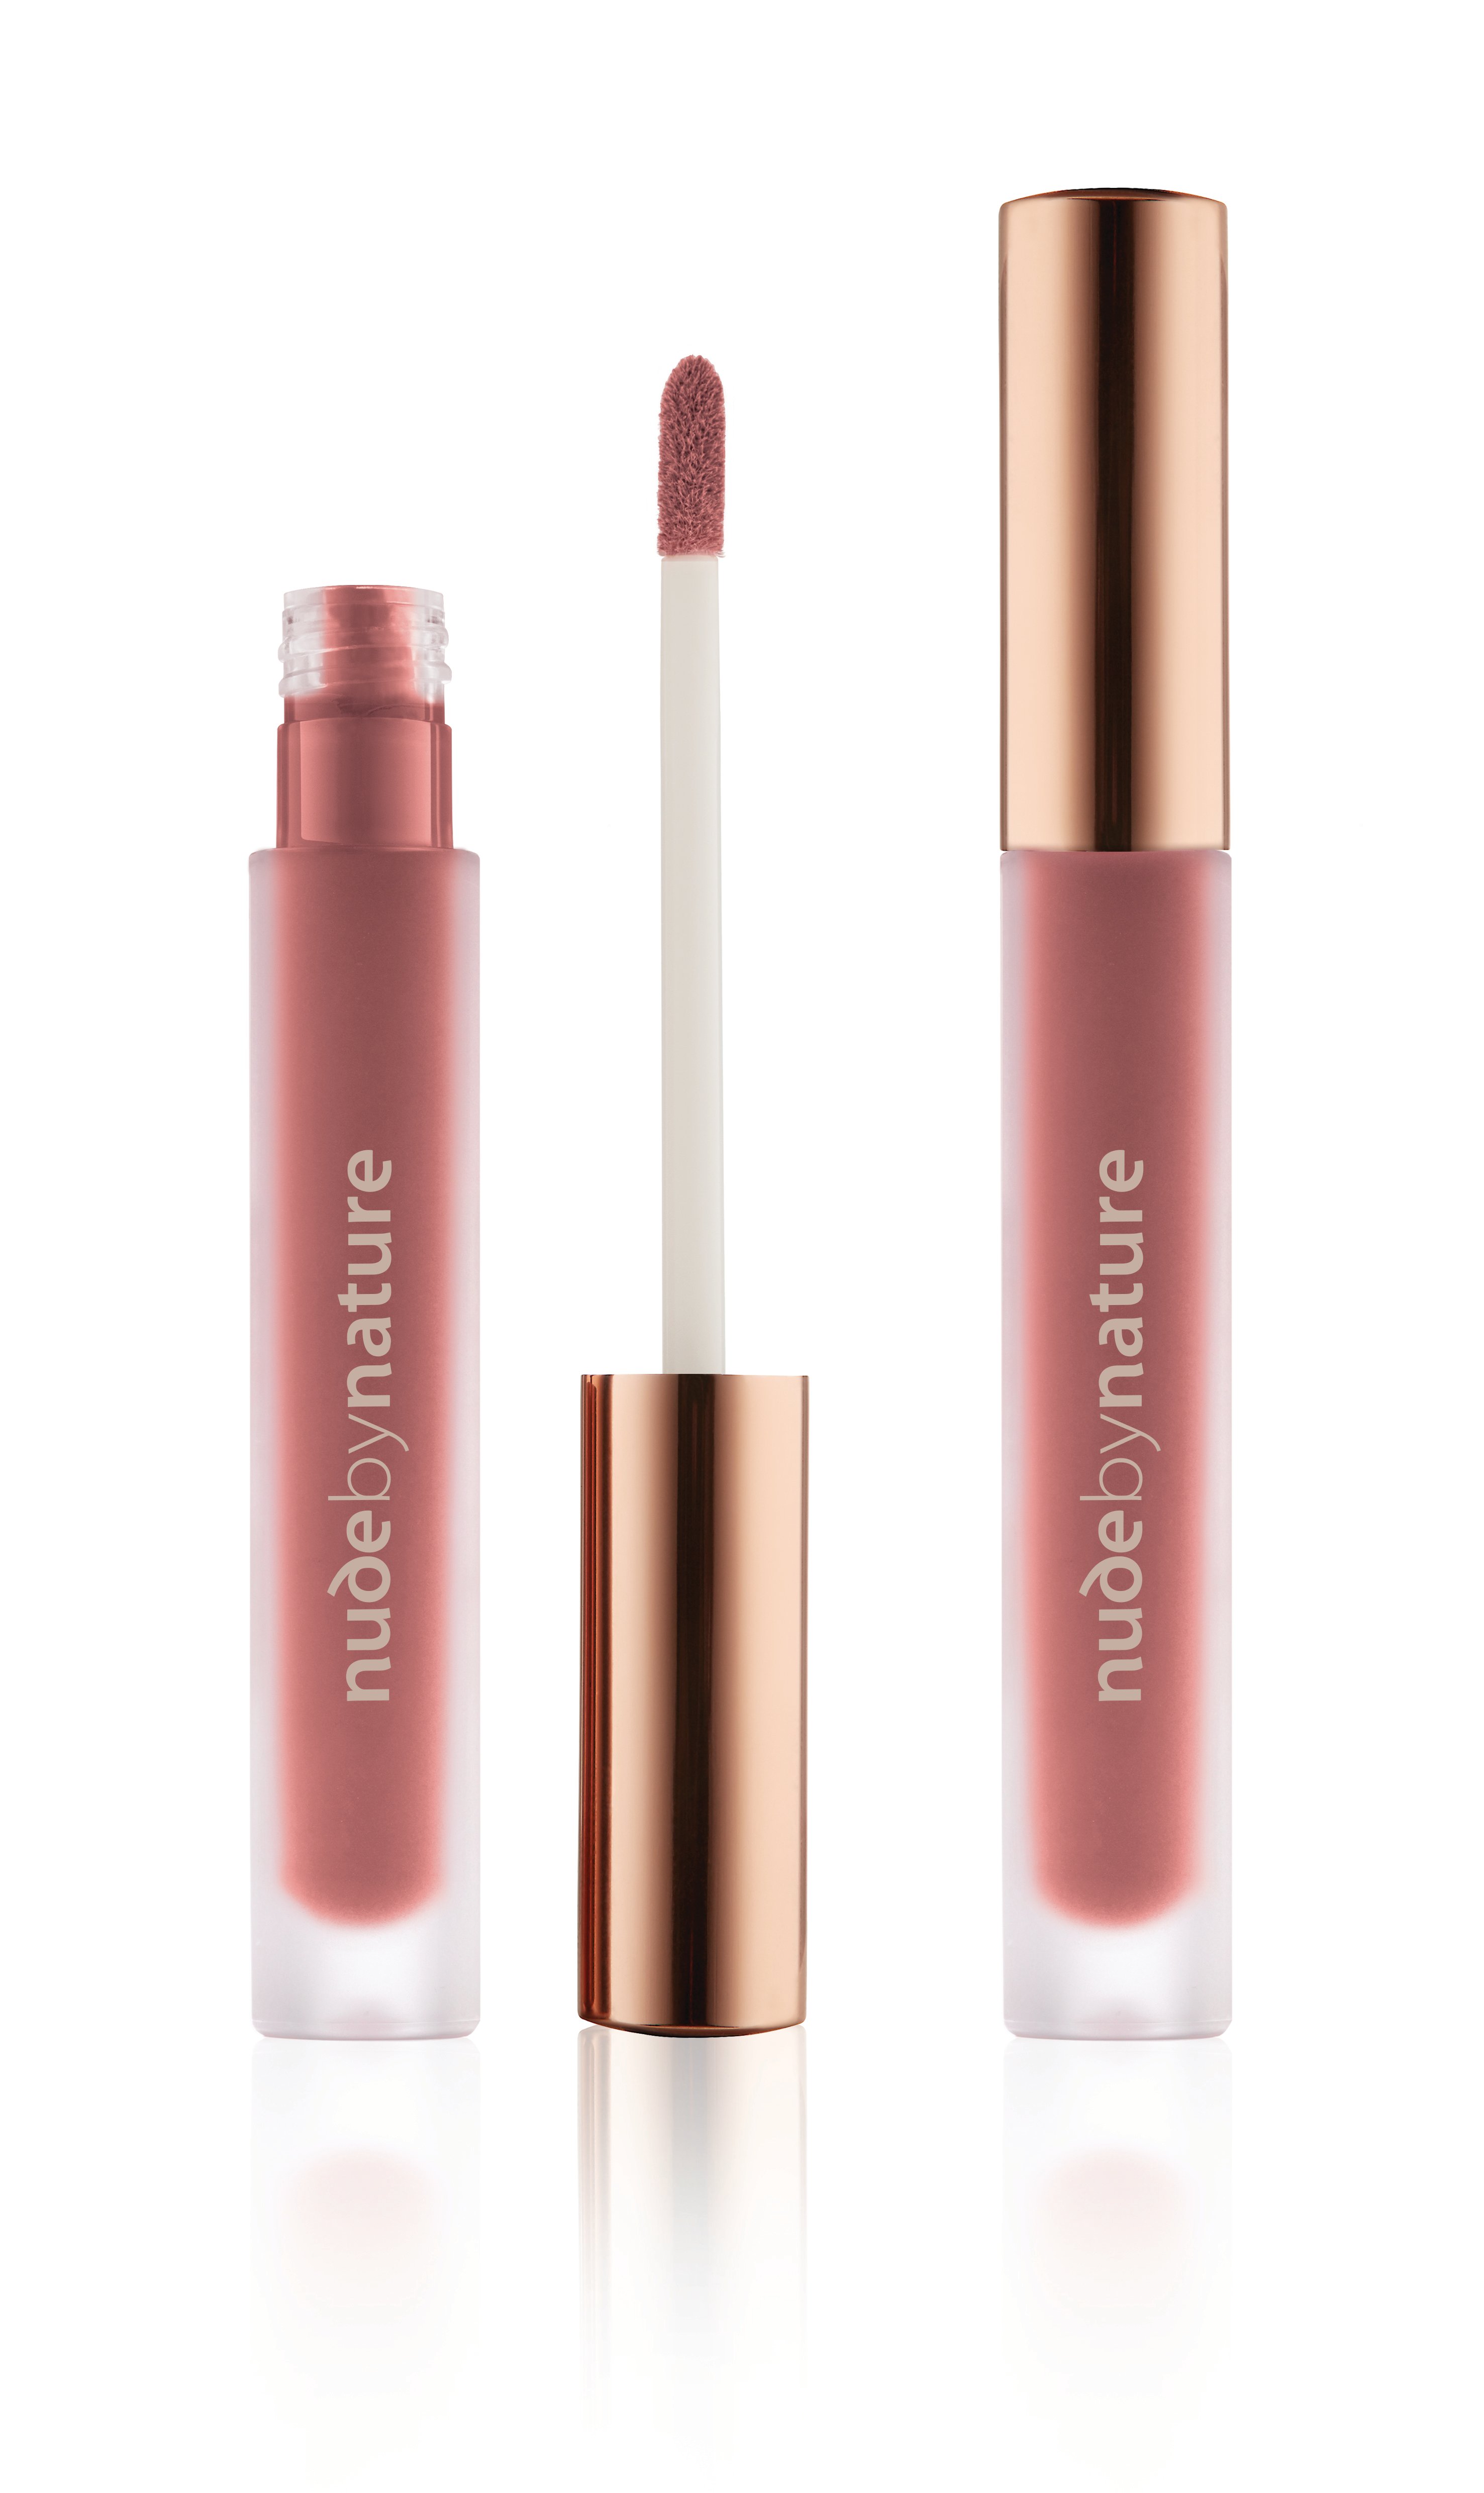 Nude by Nature - Satin Liquid Lipstick - 03 Natural